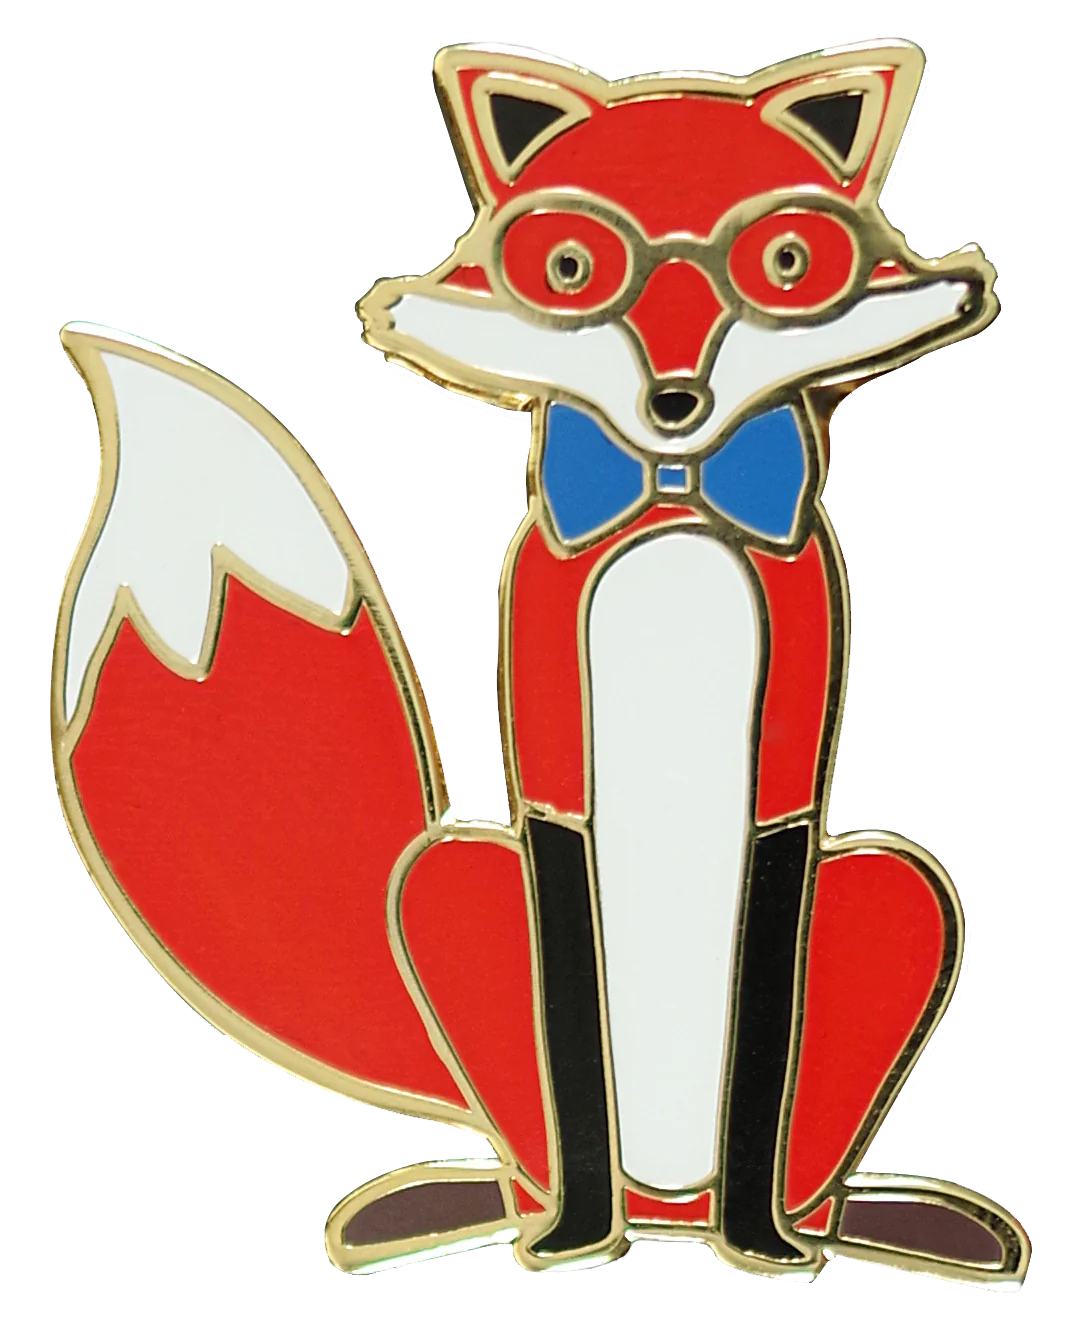 Red, white, and black fox pin with a blue bowtie and glasses